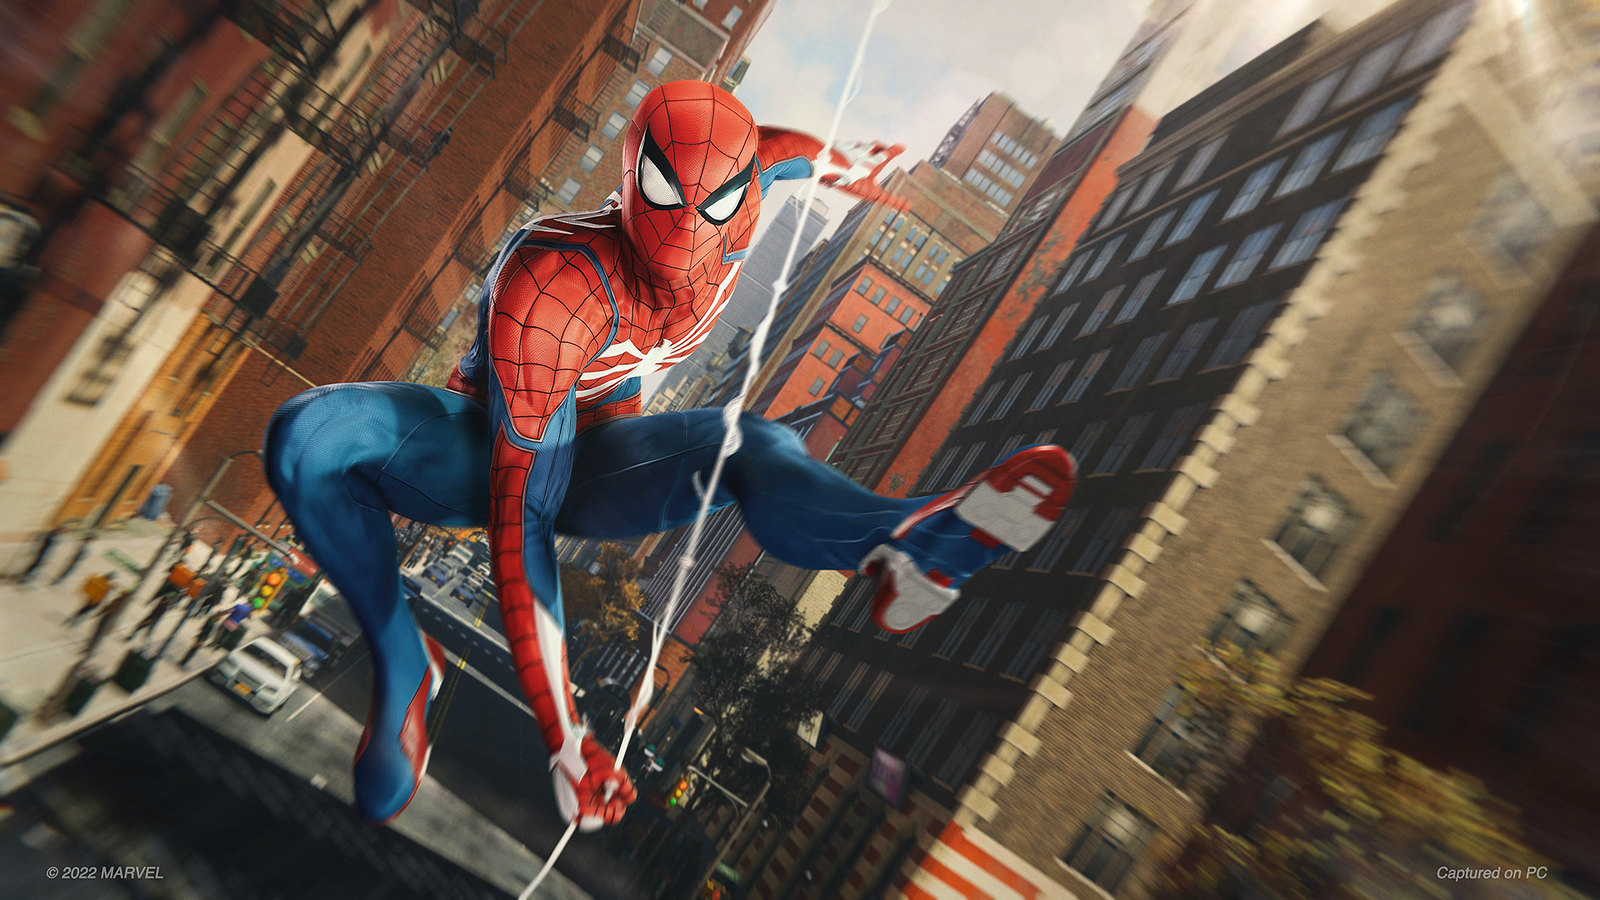 Remember when Insomniac said Spider-Man “will never appear on PC”? Twitter sure does